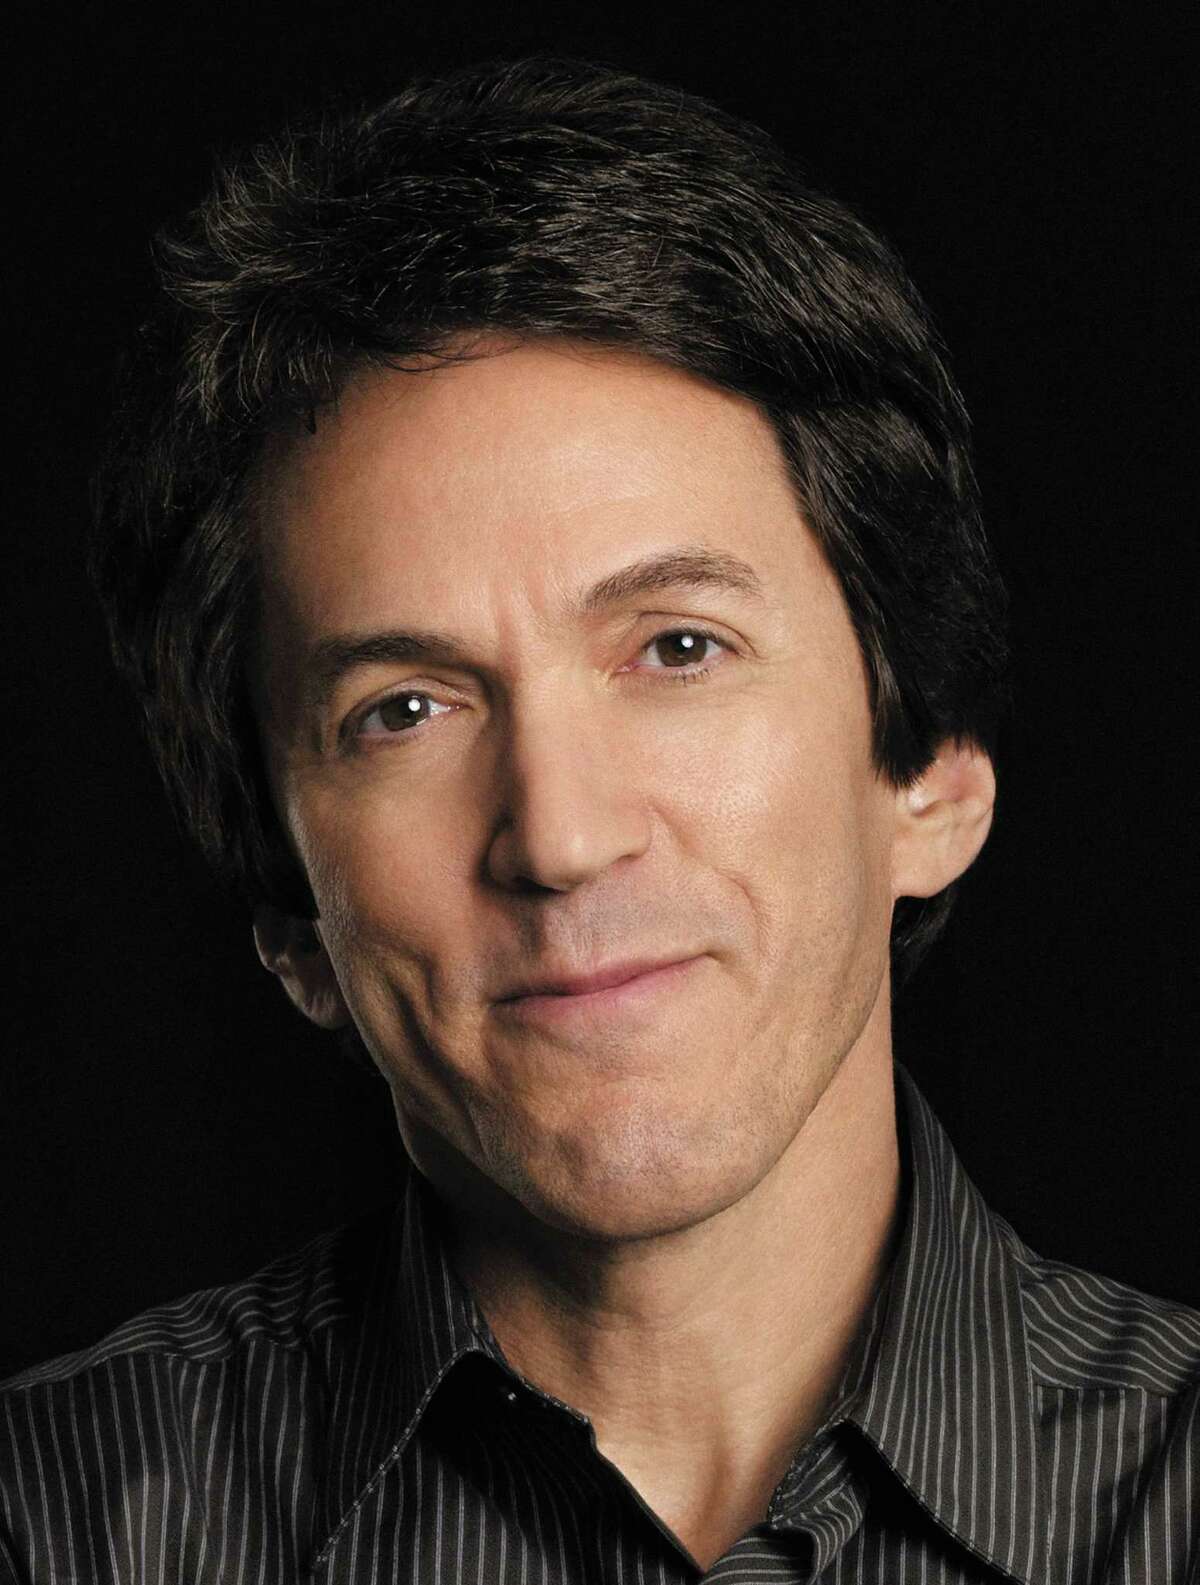 Mitch Albom is a novelist, memoirist, journalist and playwright. He will discuss his forthcoming novel, "The First Phone Call from Heaven" (pub. date Nov. 12) at the Jewish Book & Arts Fair, 8 p.m. Nov. 18, the fair's closing night.